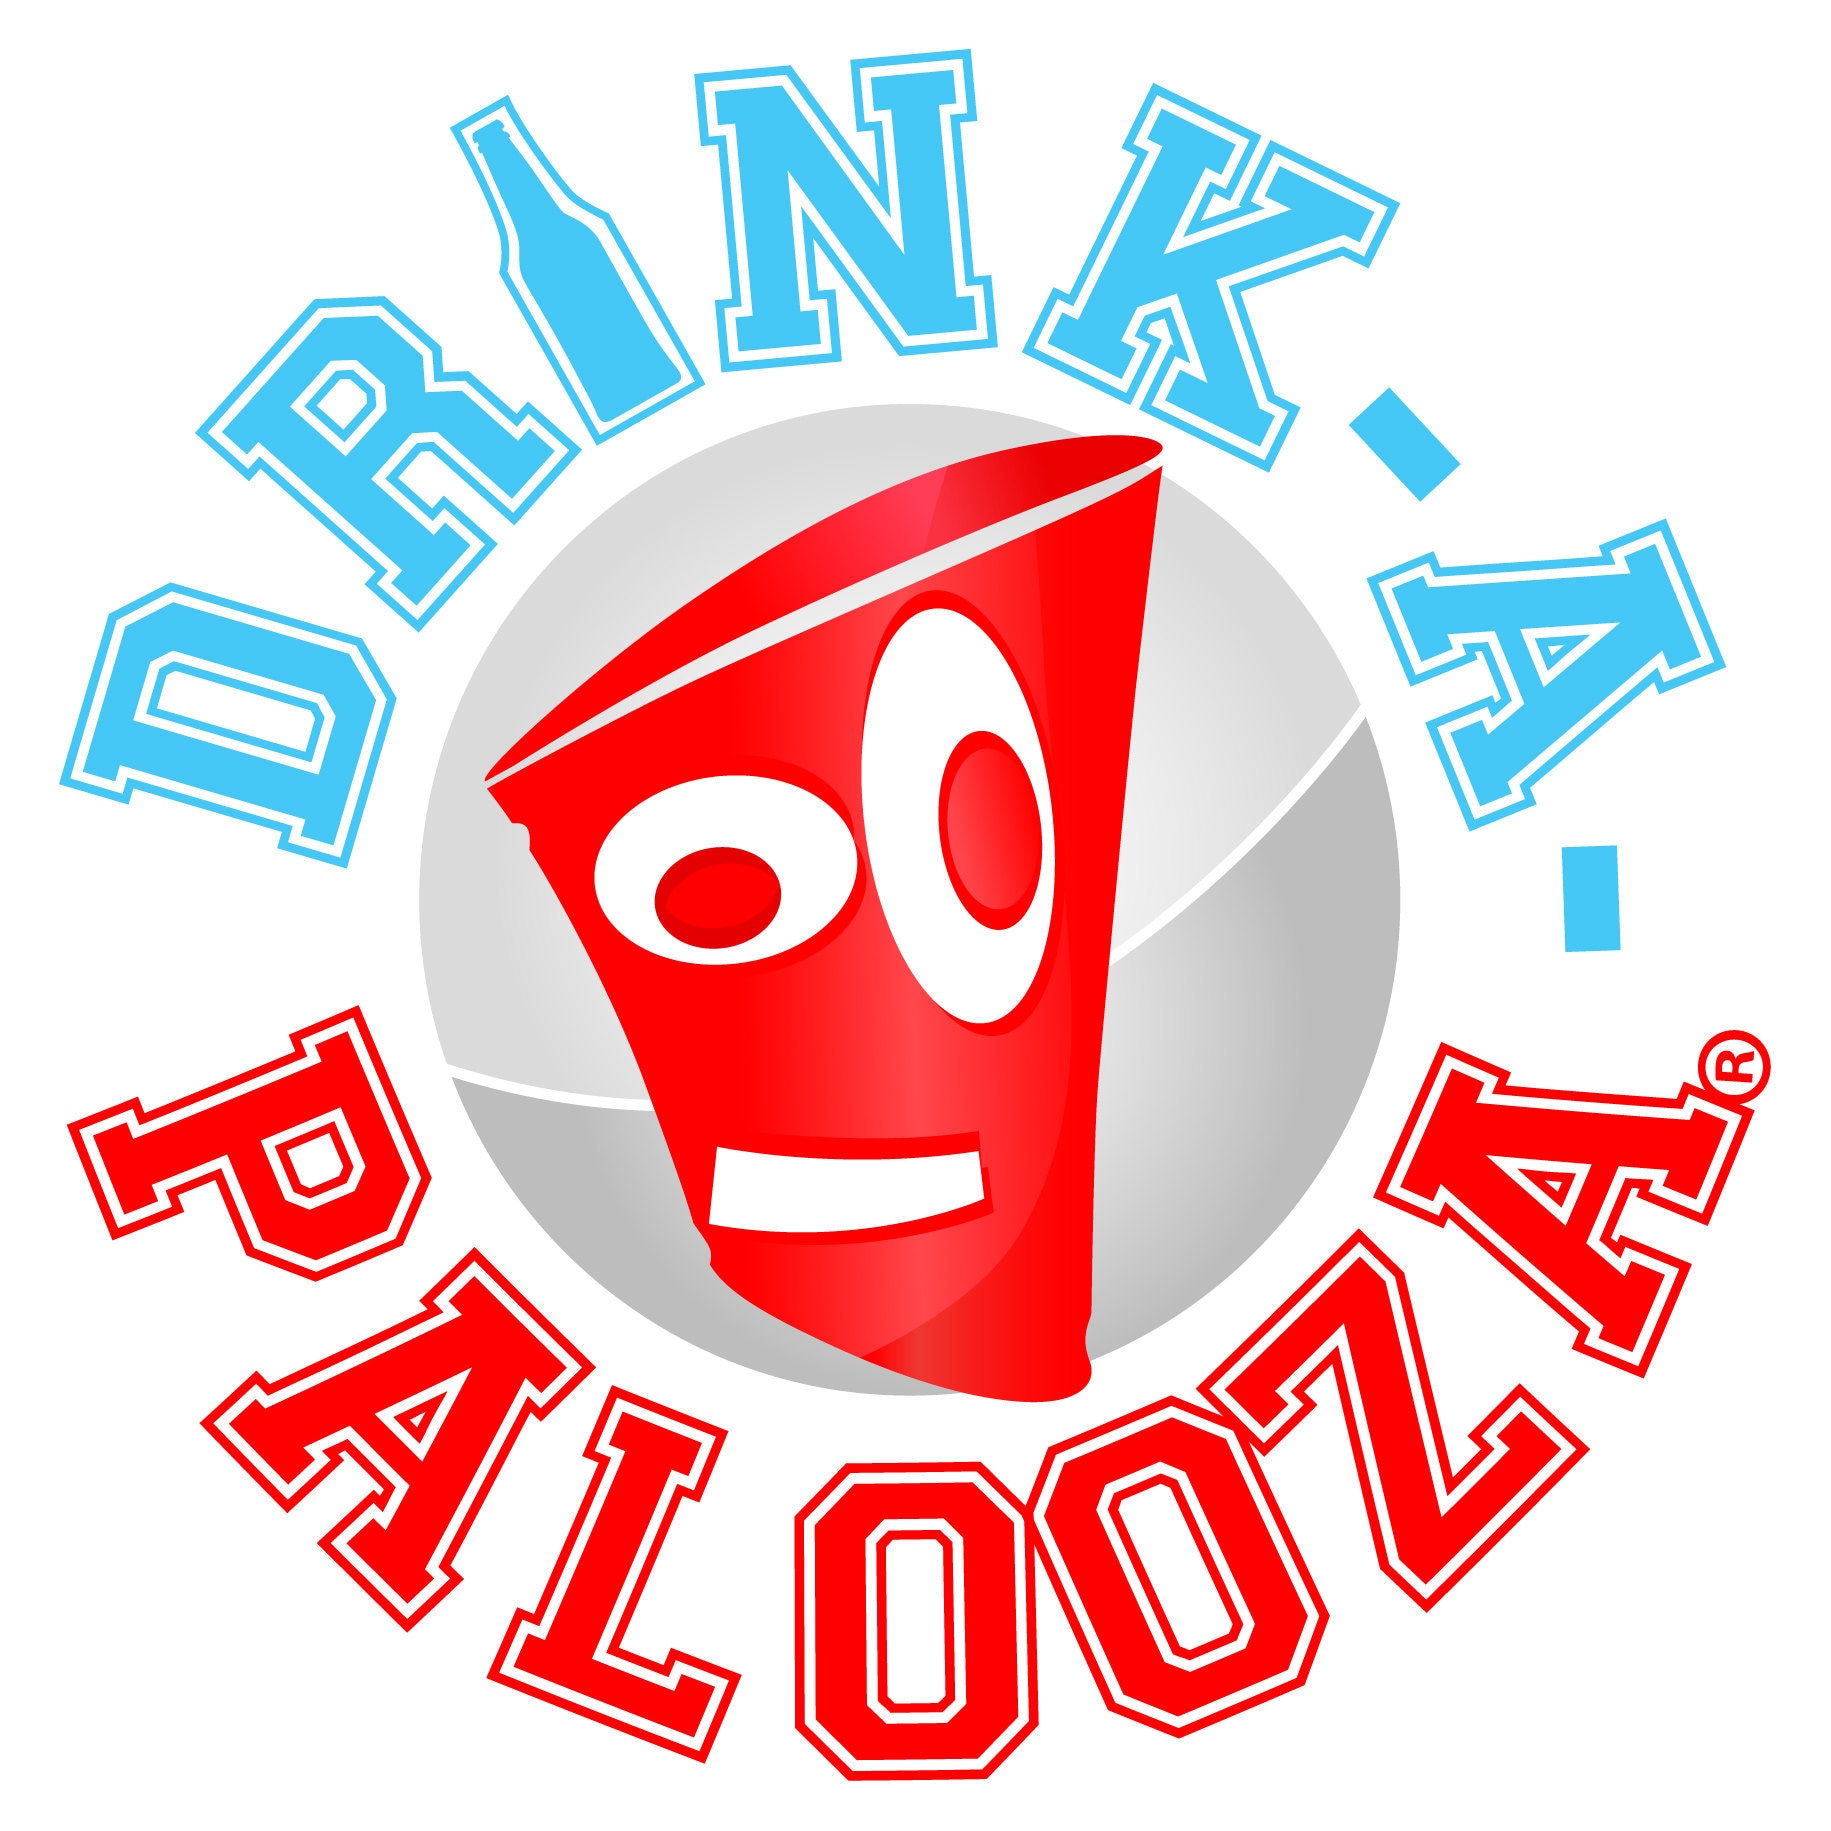 DRINK-A-PALOOZA Board Game: Fun Drinking Games for Couples Game Night | The  Drinking Board Game for Parties That Combines Beer Pong + Flip Cup + Kings